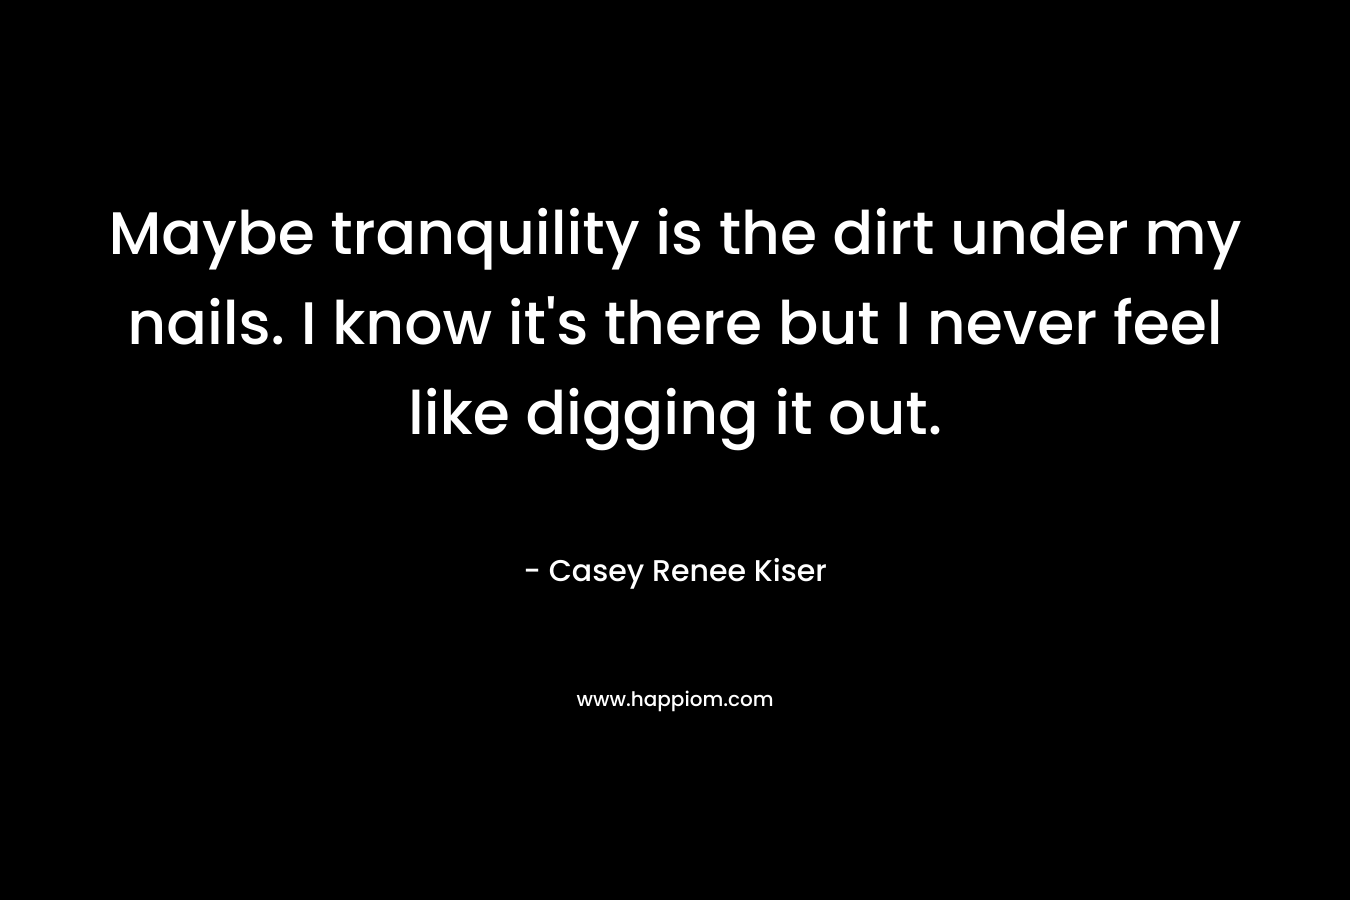 Maybe tranquility is the dirt under my nails. I know it’s there but I never feel like digging it out. – Casey Renee Kiser